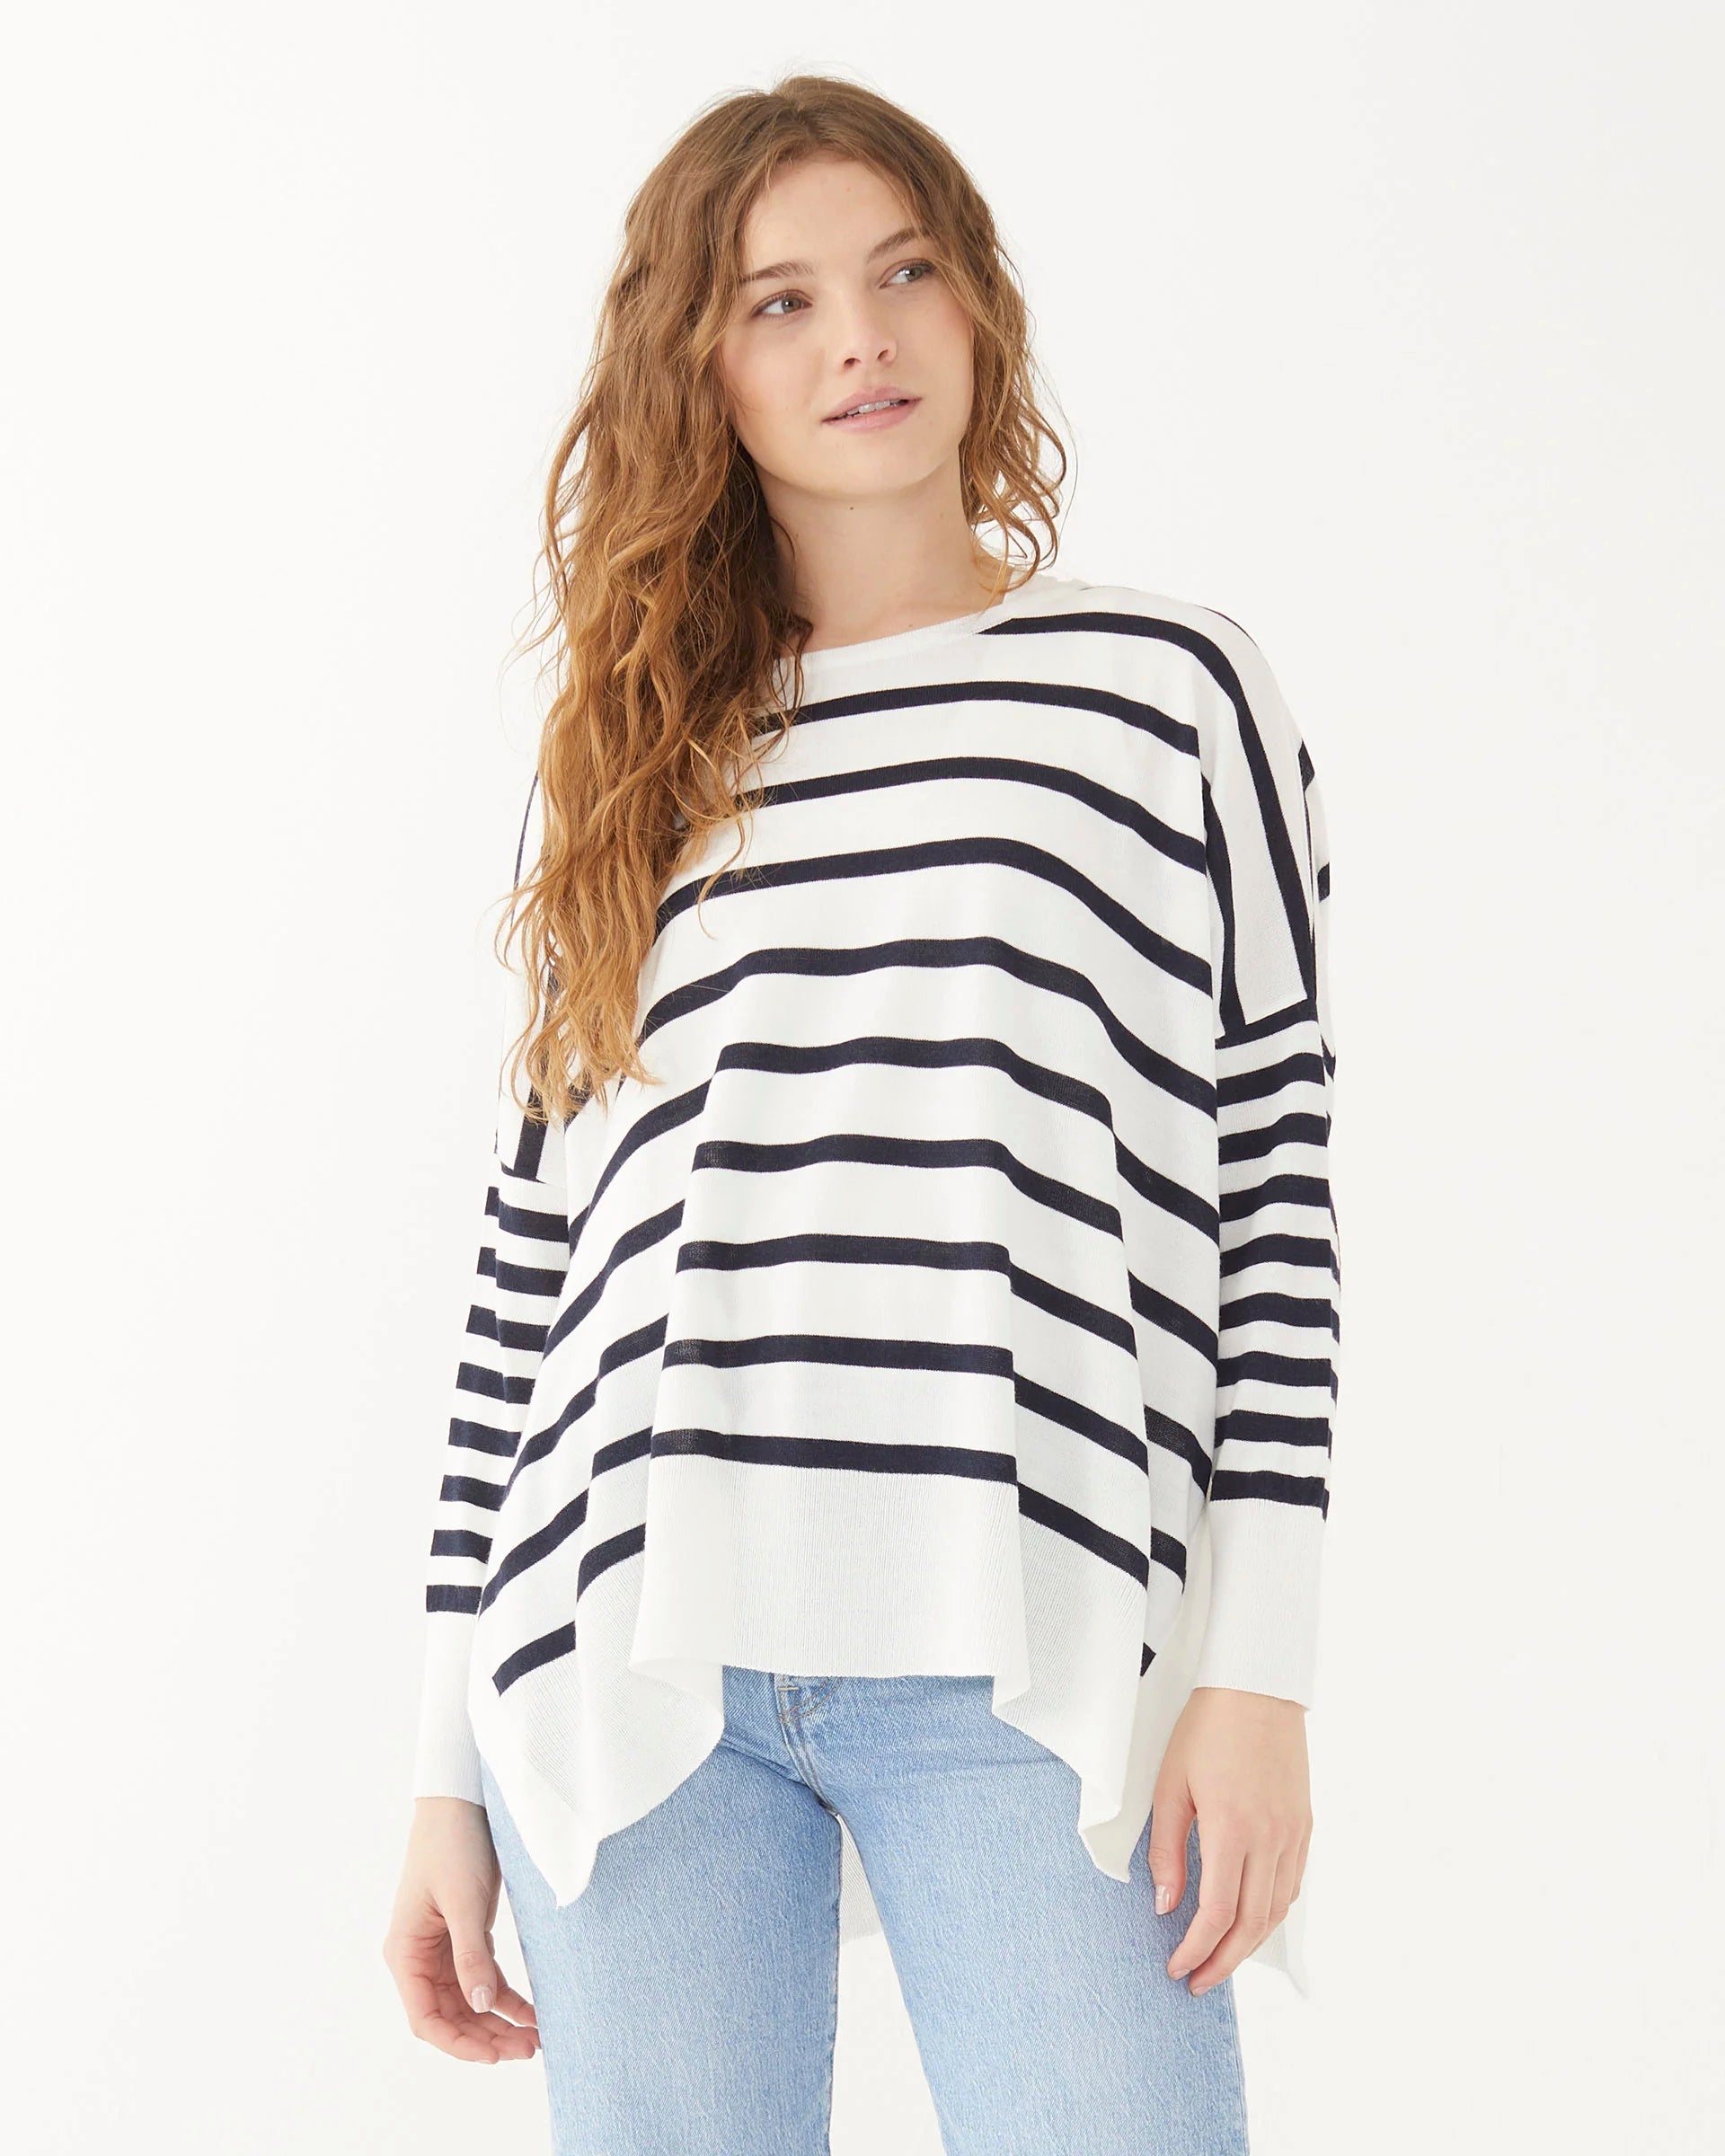 Amour Navy Striped Sweater by Mer Sea - Fig Linens and Home 6